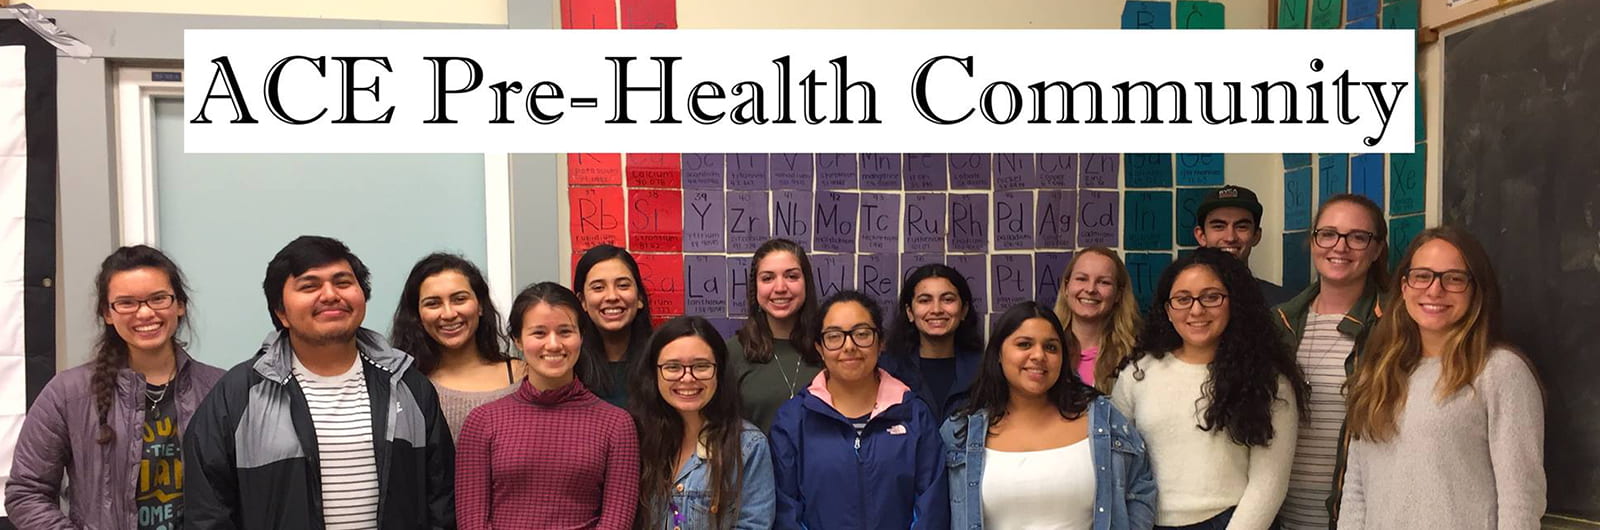 ACE Pre-Health Community banner displayed above a group of smiling students.